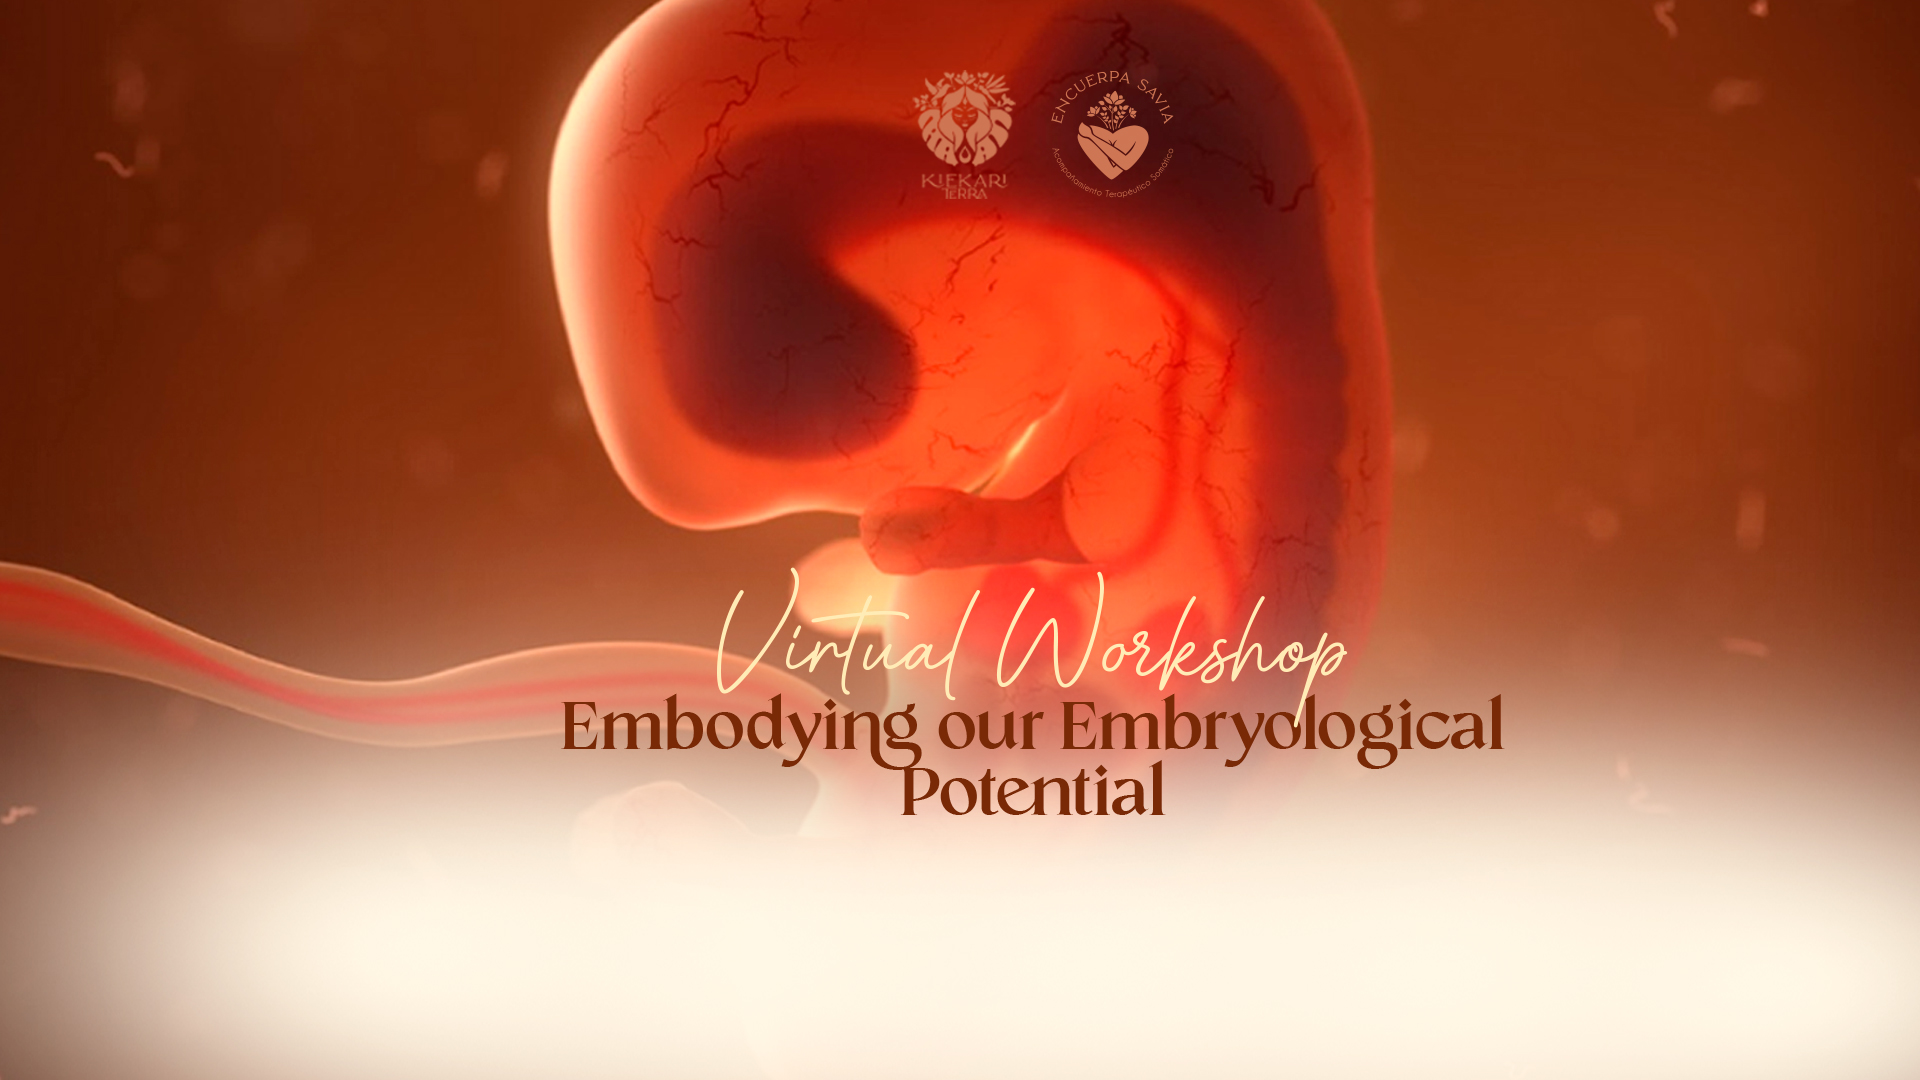 Embodying our Embryological Potential